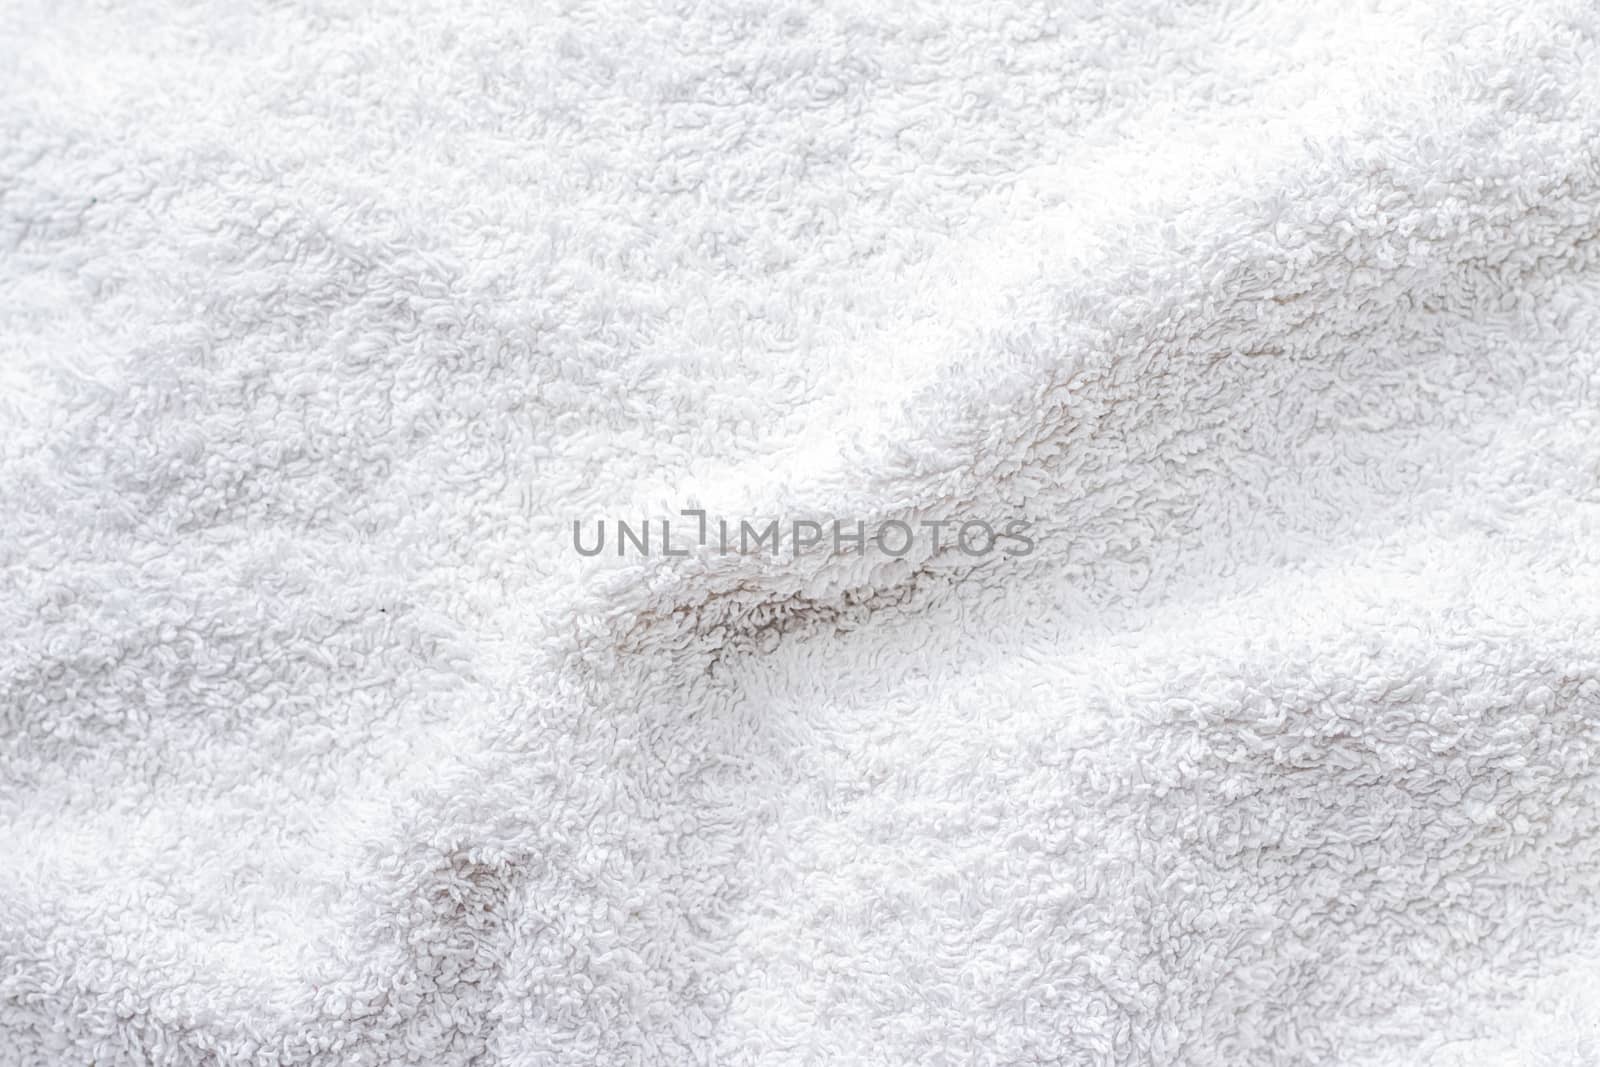 Texture of towel fabric as background, close-up